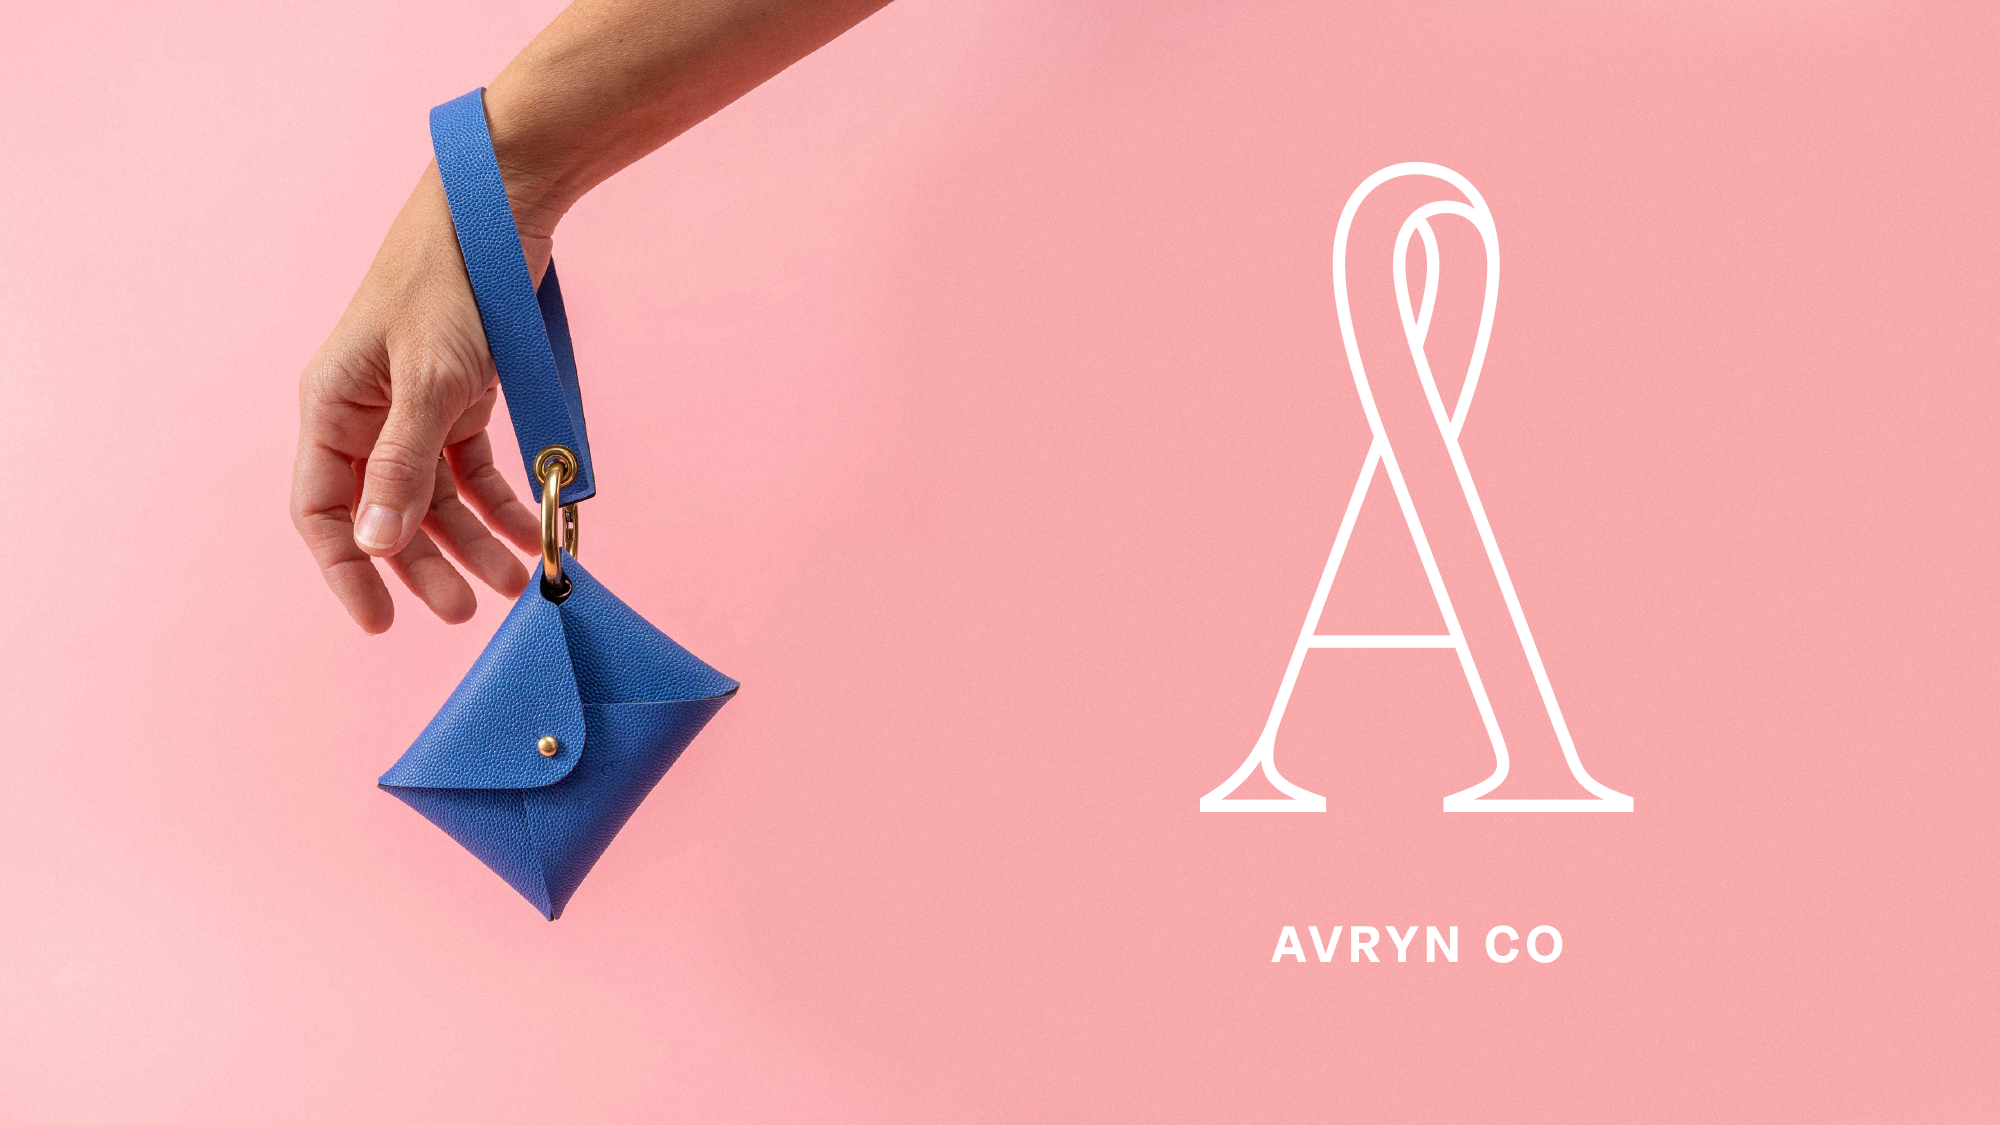 Warm Brand Design Studio | Avryn Co. product images and logo